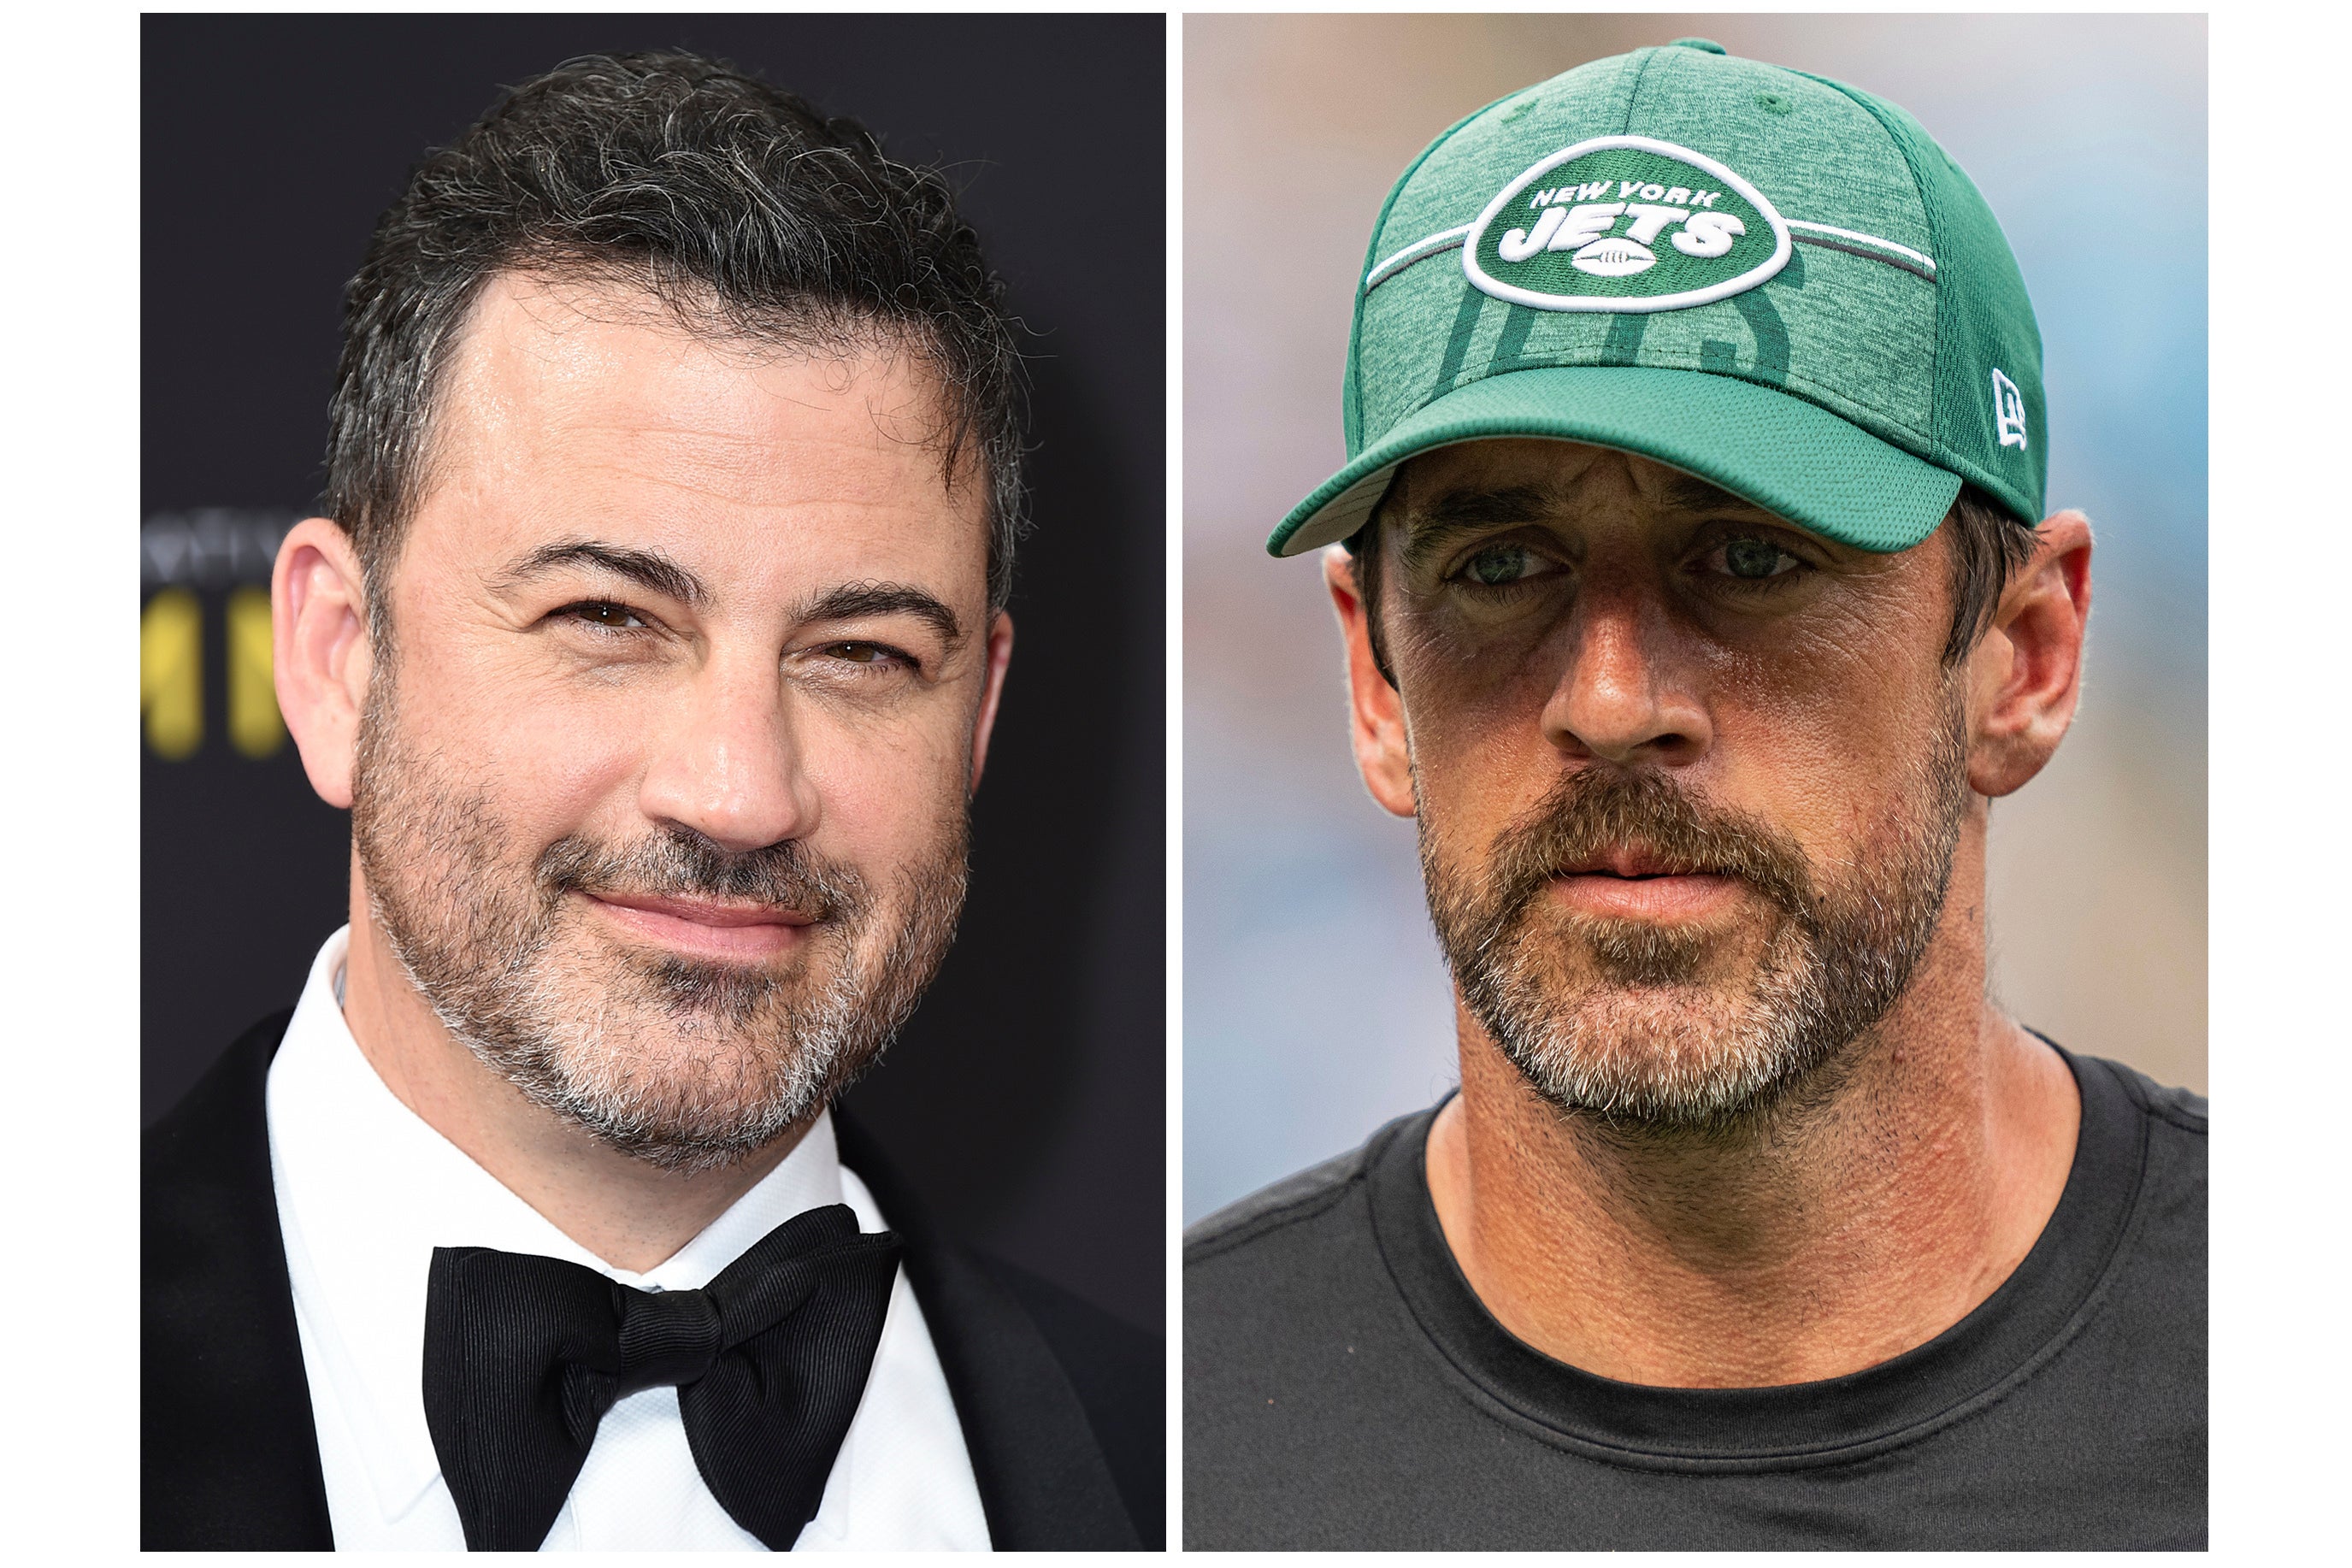 Jimmy Kimmel (left) and Aaron Rodgers